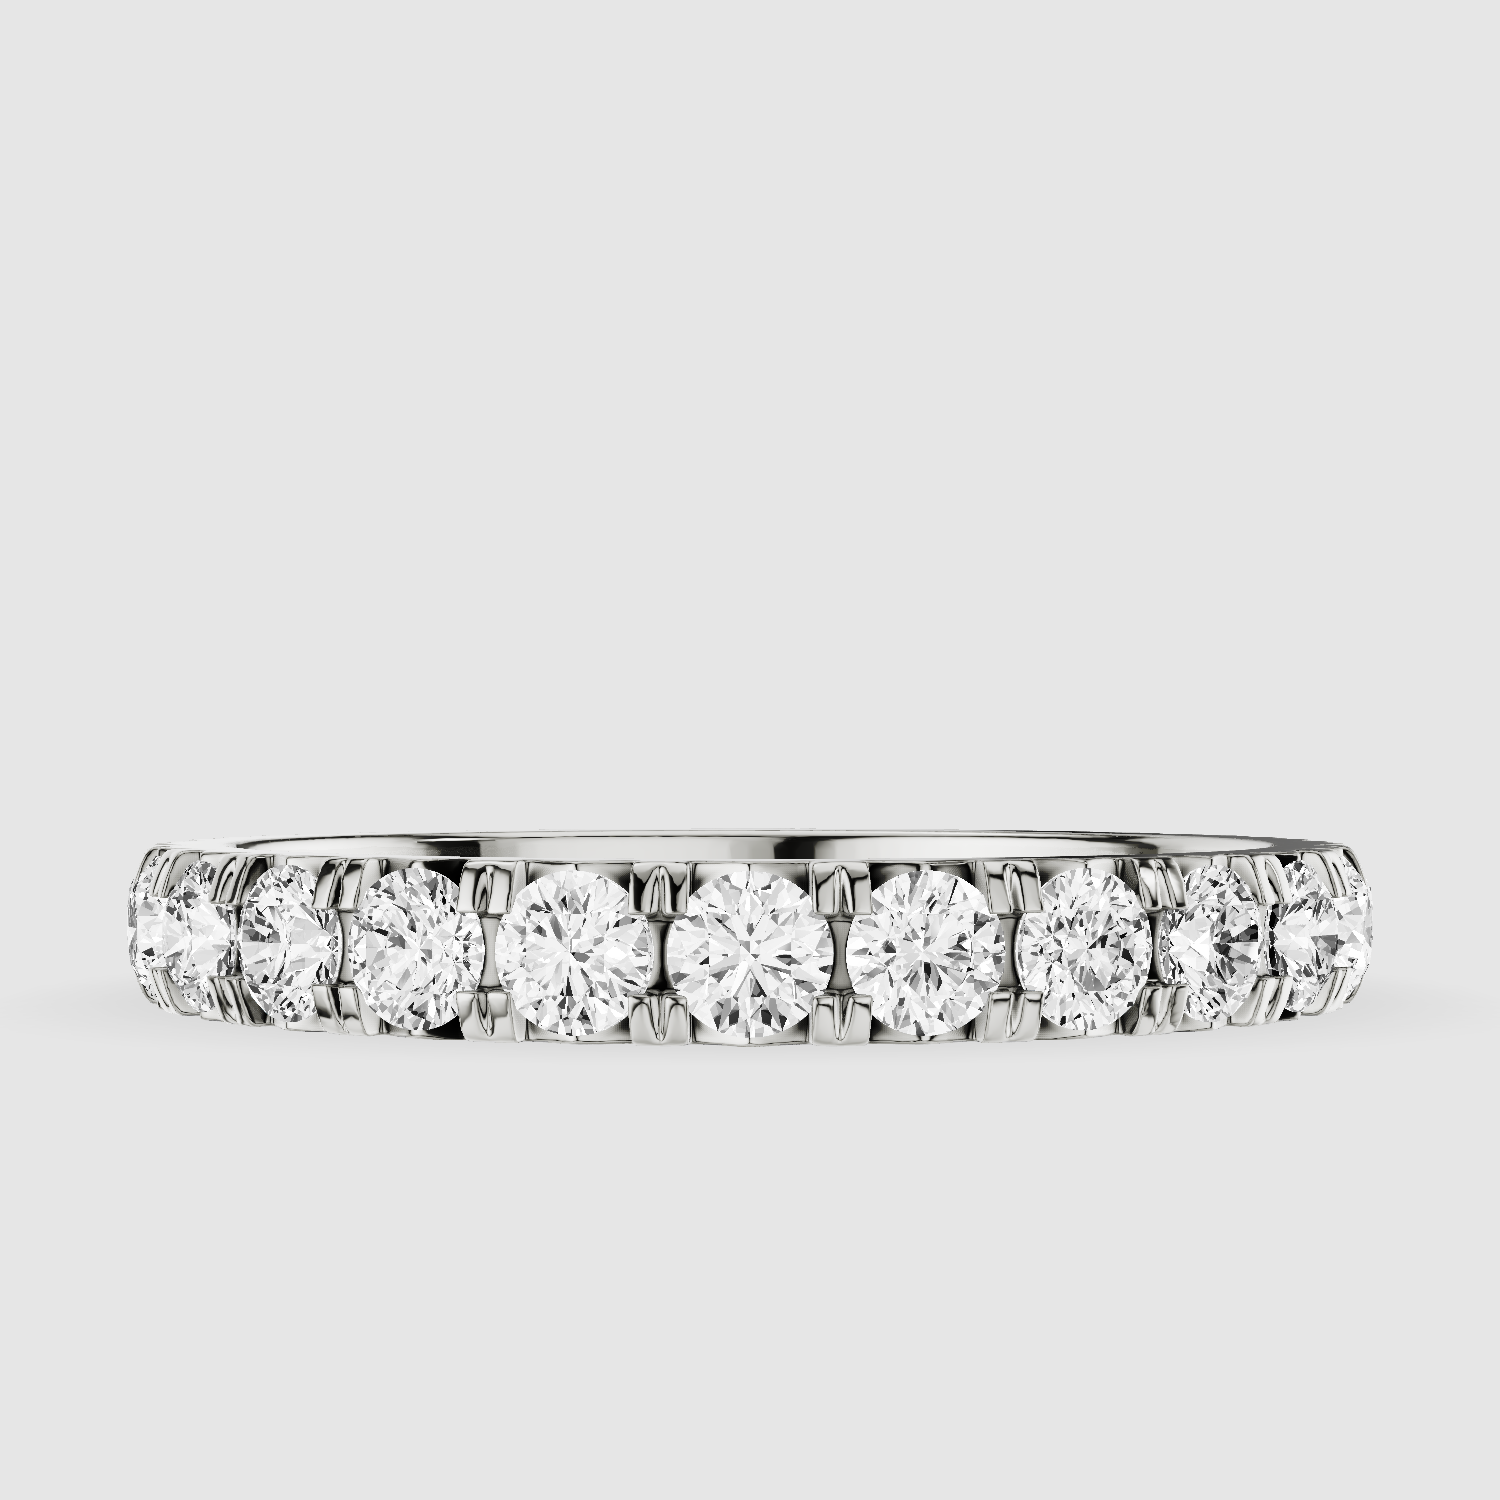 800L-101 Vintage Modern bezel set diamond platinum high polish wedding  eternity band [800L-101P] : Platinum Plus Designs, manufacturers of antique  reproduction jewelry, Micro-Pave bands and French cut rings, Elegant  Engagement Rings, Wedding